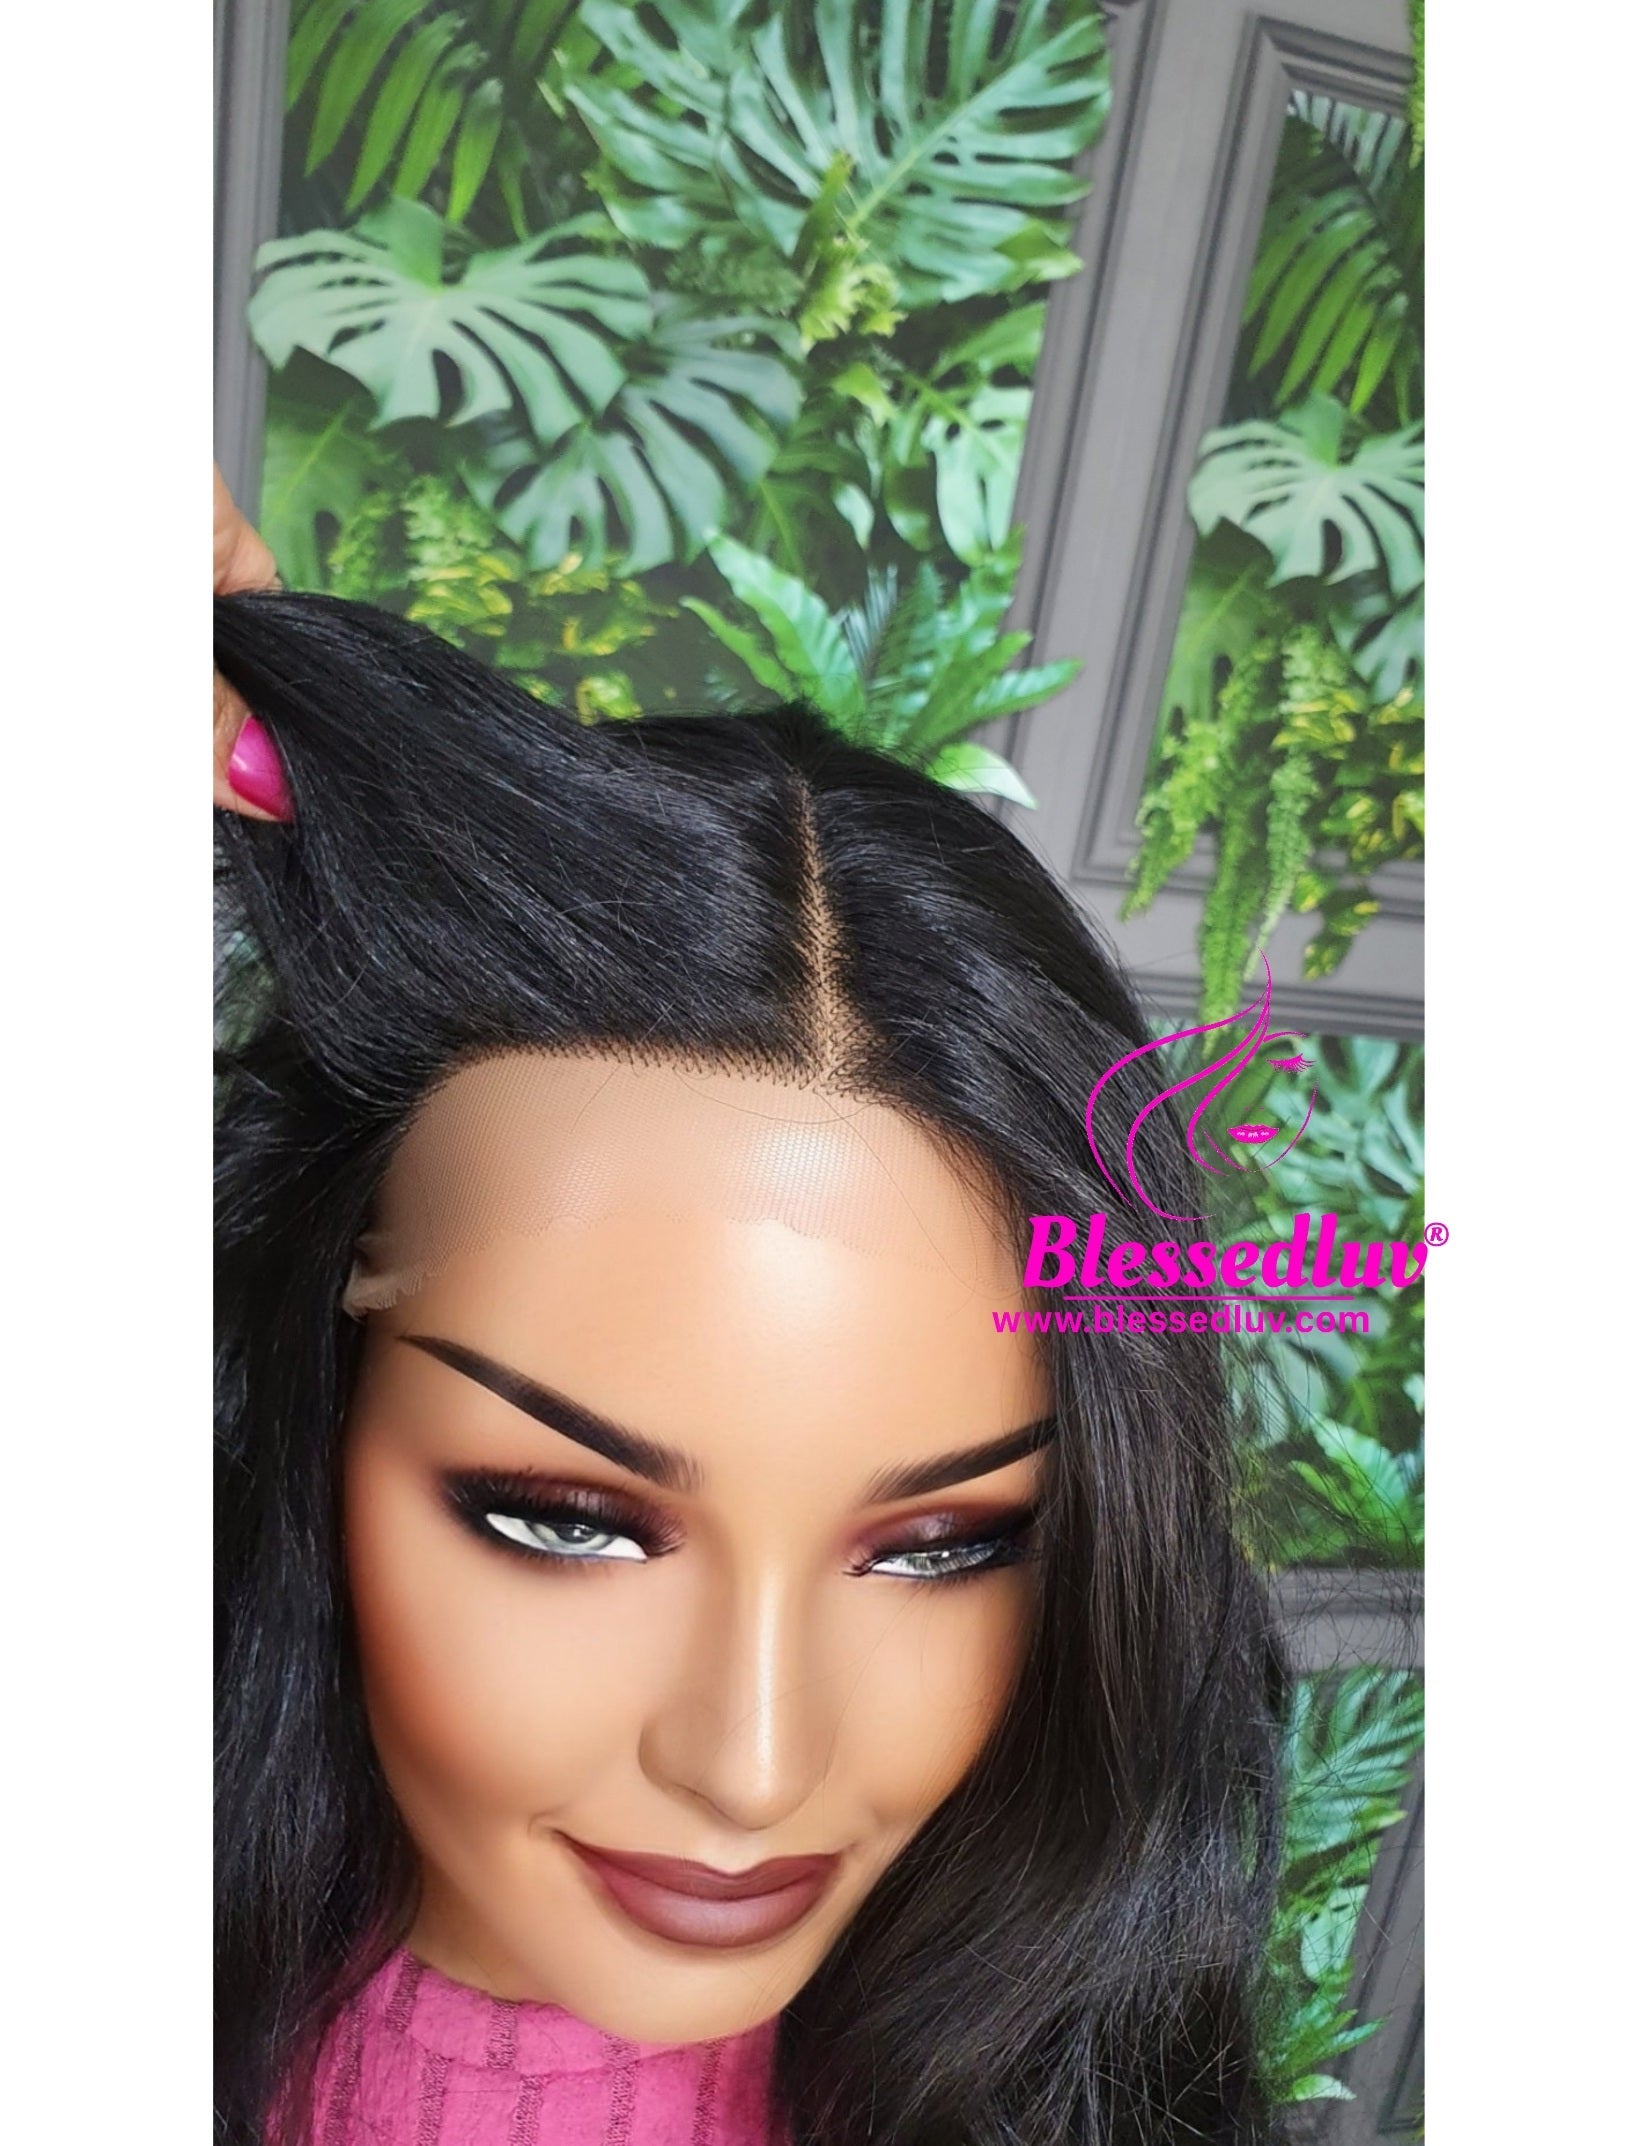 3 Blessedluv's Trusted Synthetic Wig Vendor List-Online Course-www.blessedluv.com-Brazilianweave.com